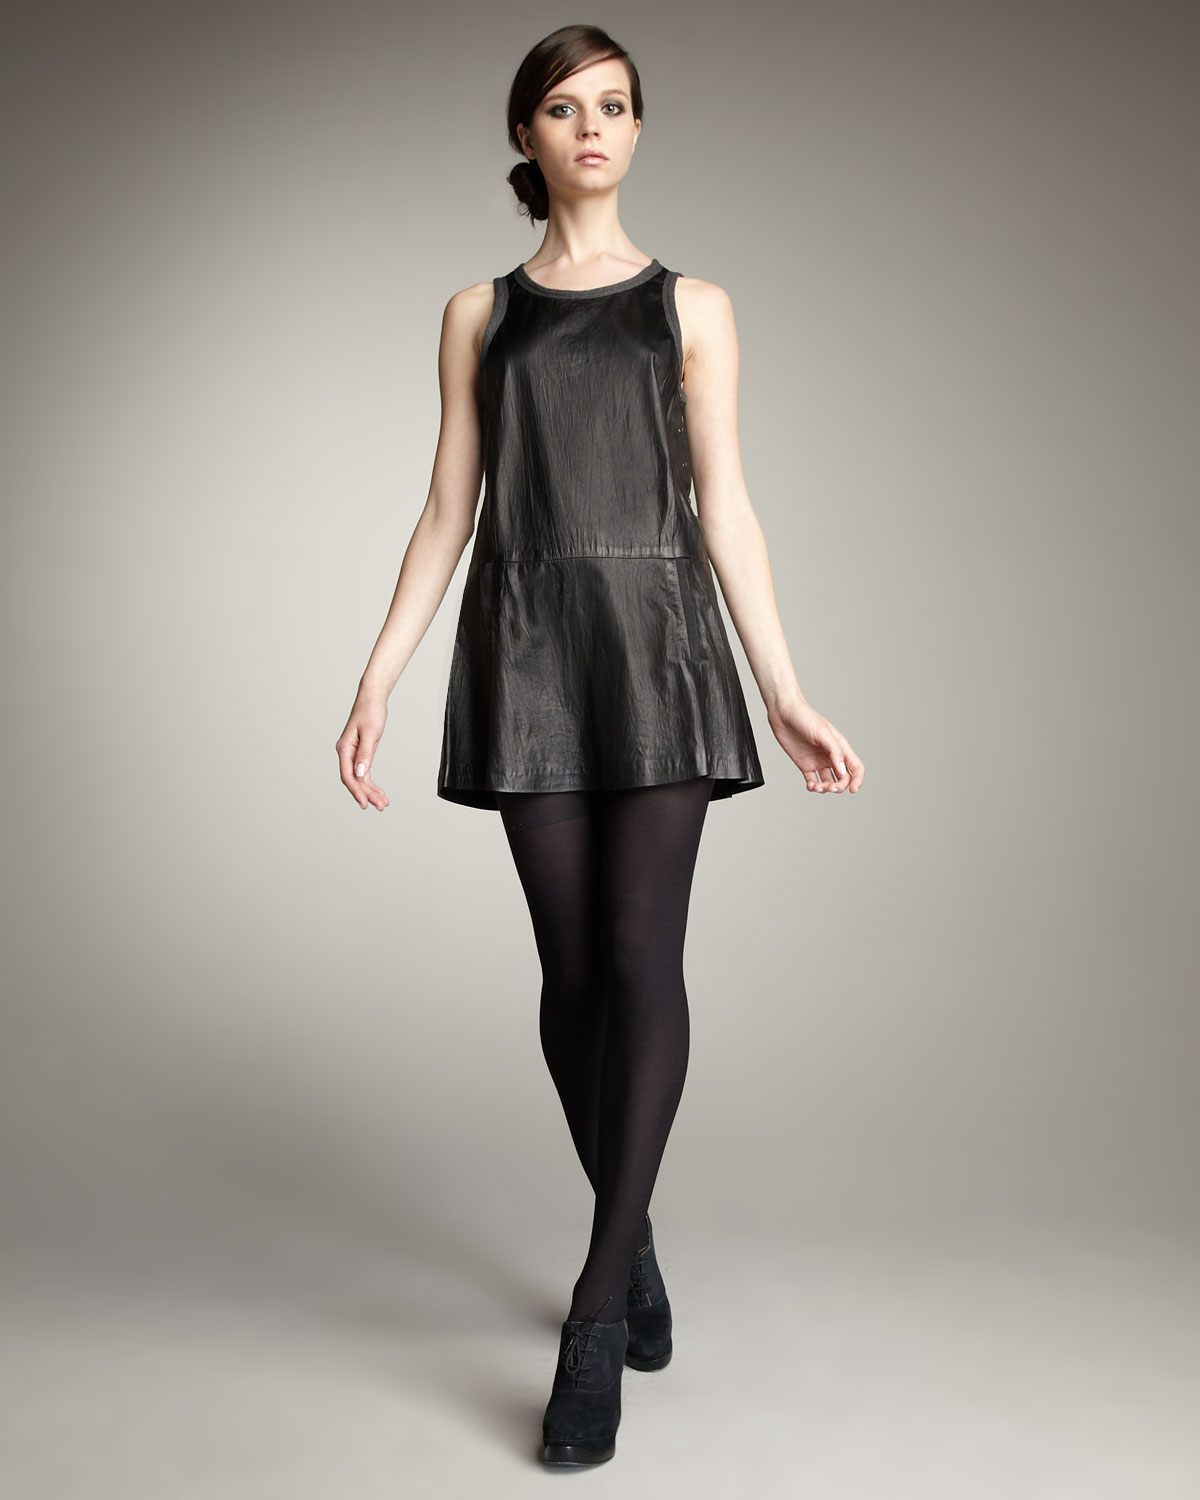 Lyst - Theory Sleeveless Crinkled Leather Dress in Black